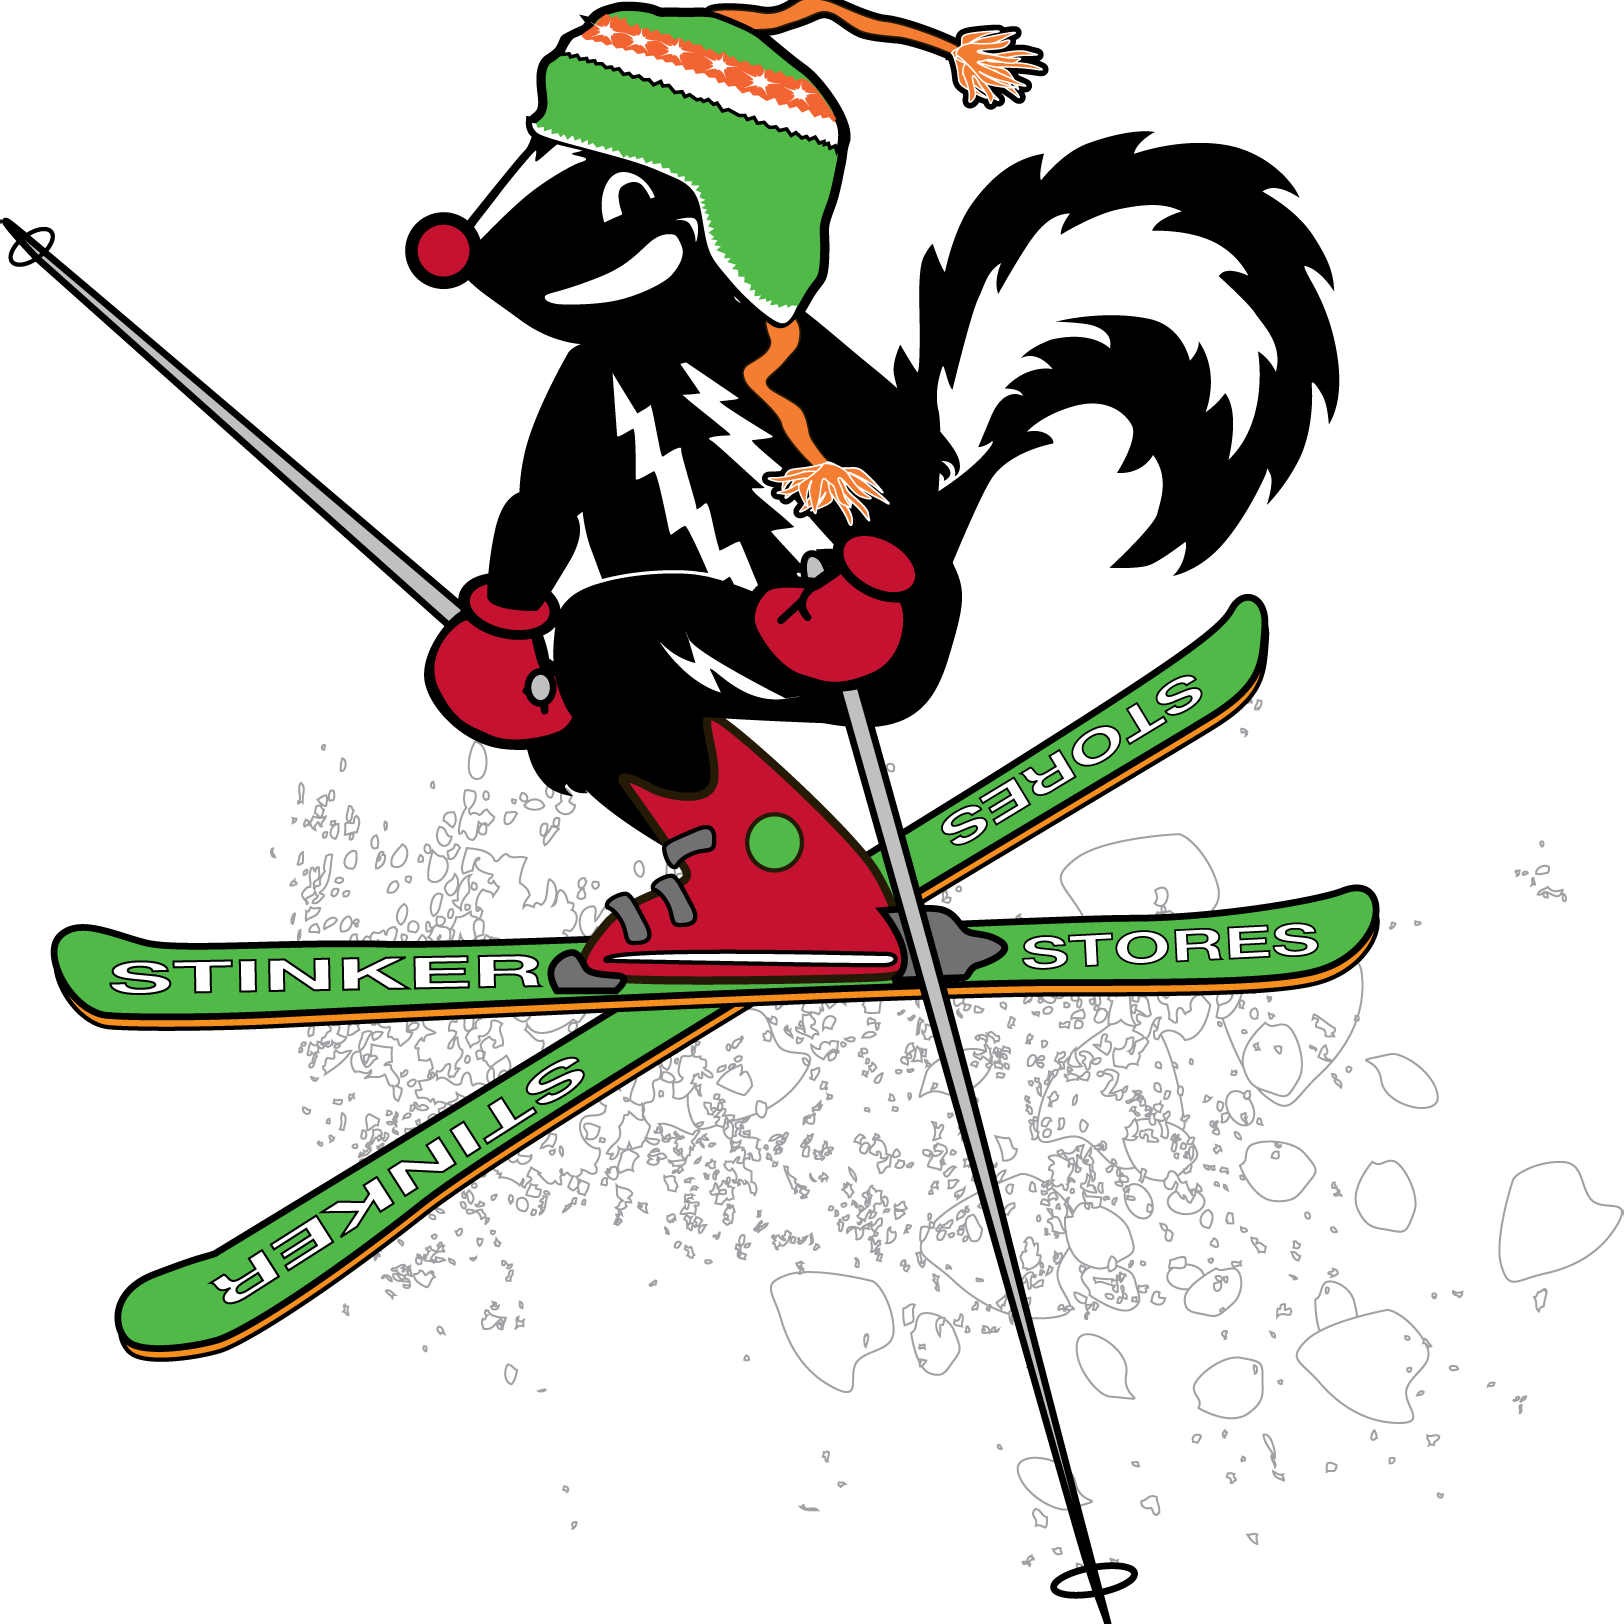 Skiing clipart freestyle skiing. Customer sales specialist silverthorne